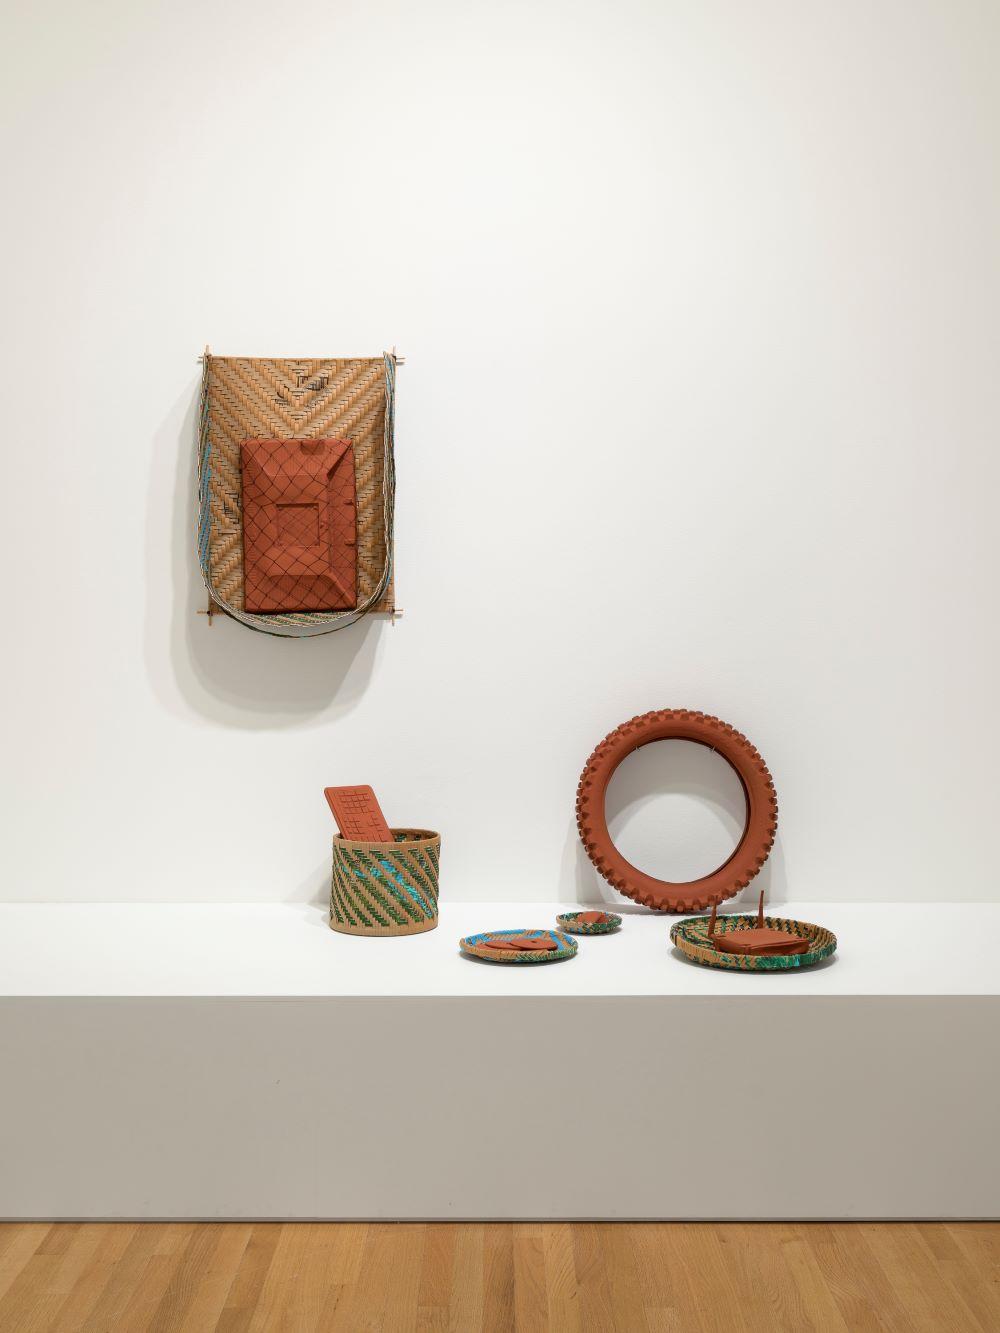 Installation of woven objects and terra cotta objects